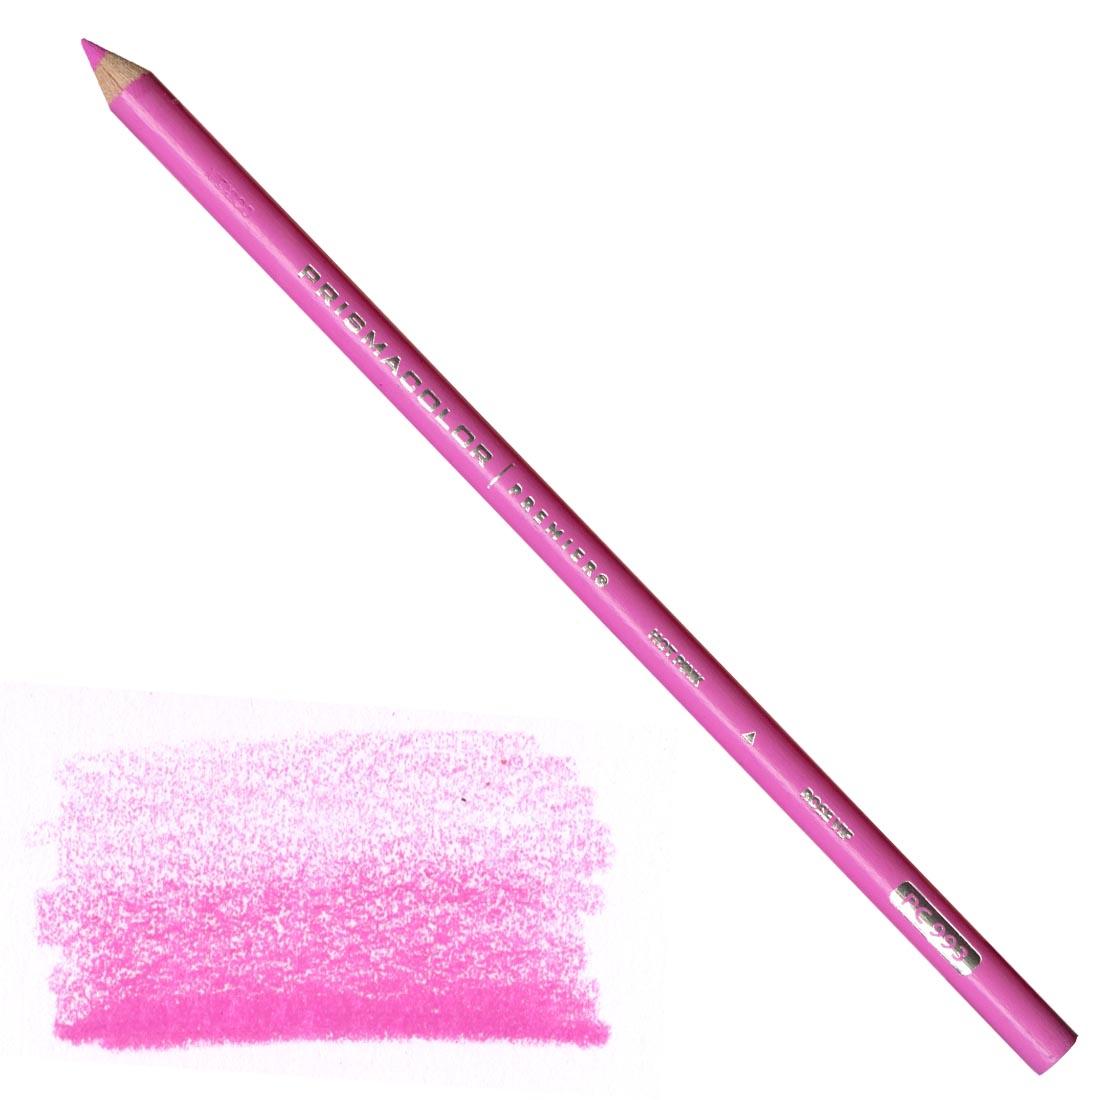 Hot Pink Prismacolor Premier Colored Pencil with a sample colored swatch